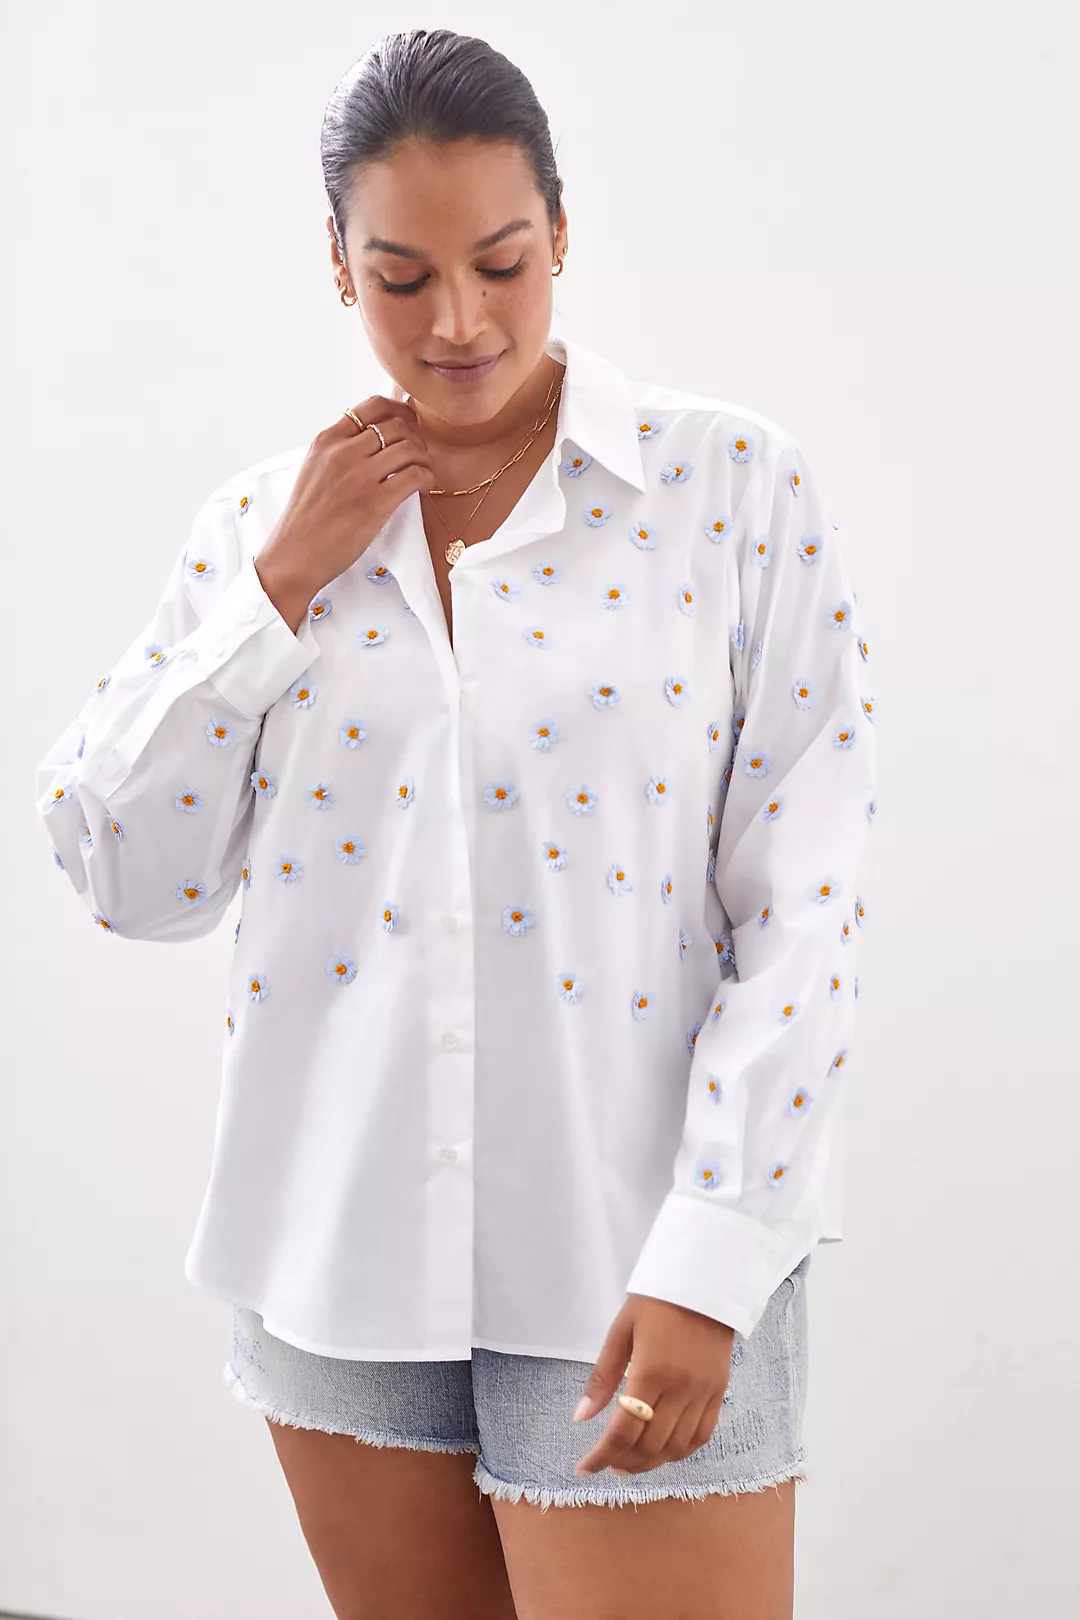 Big Boobs And Button Down Shirts! – GFW Clothing